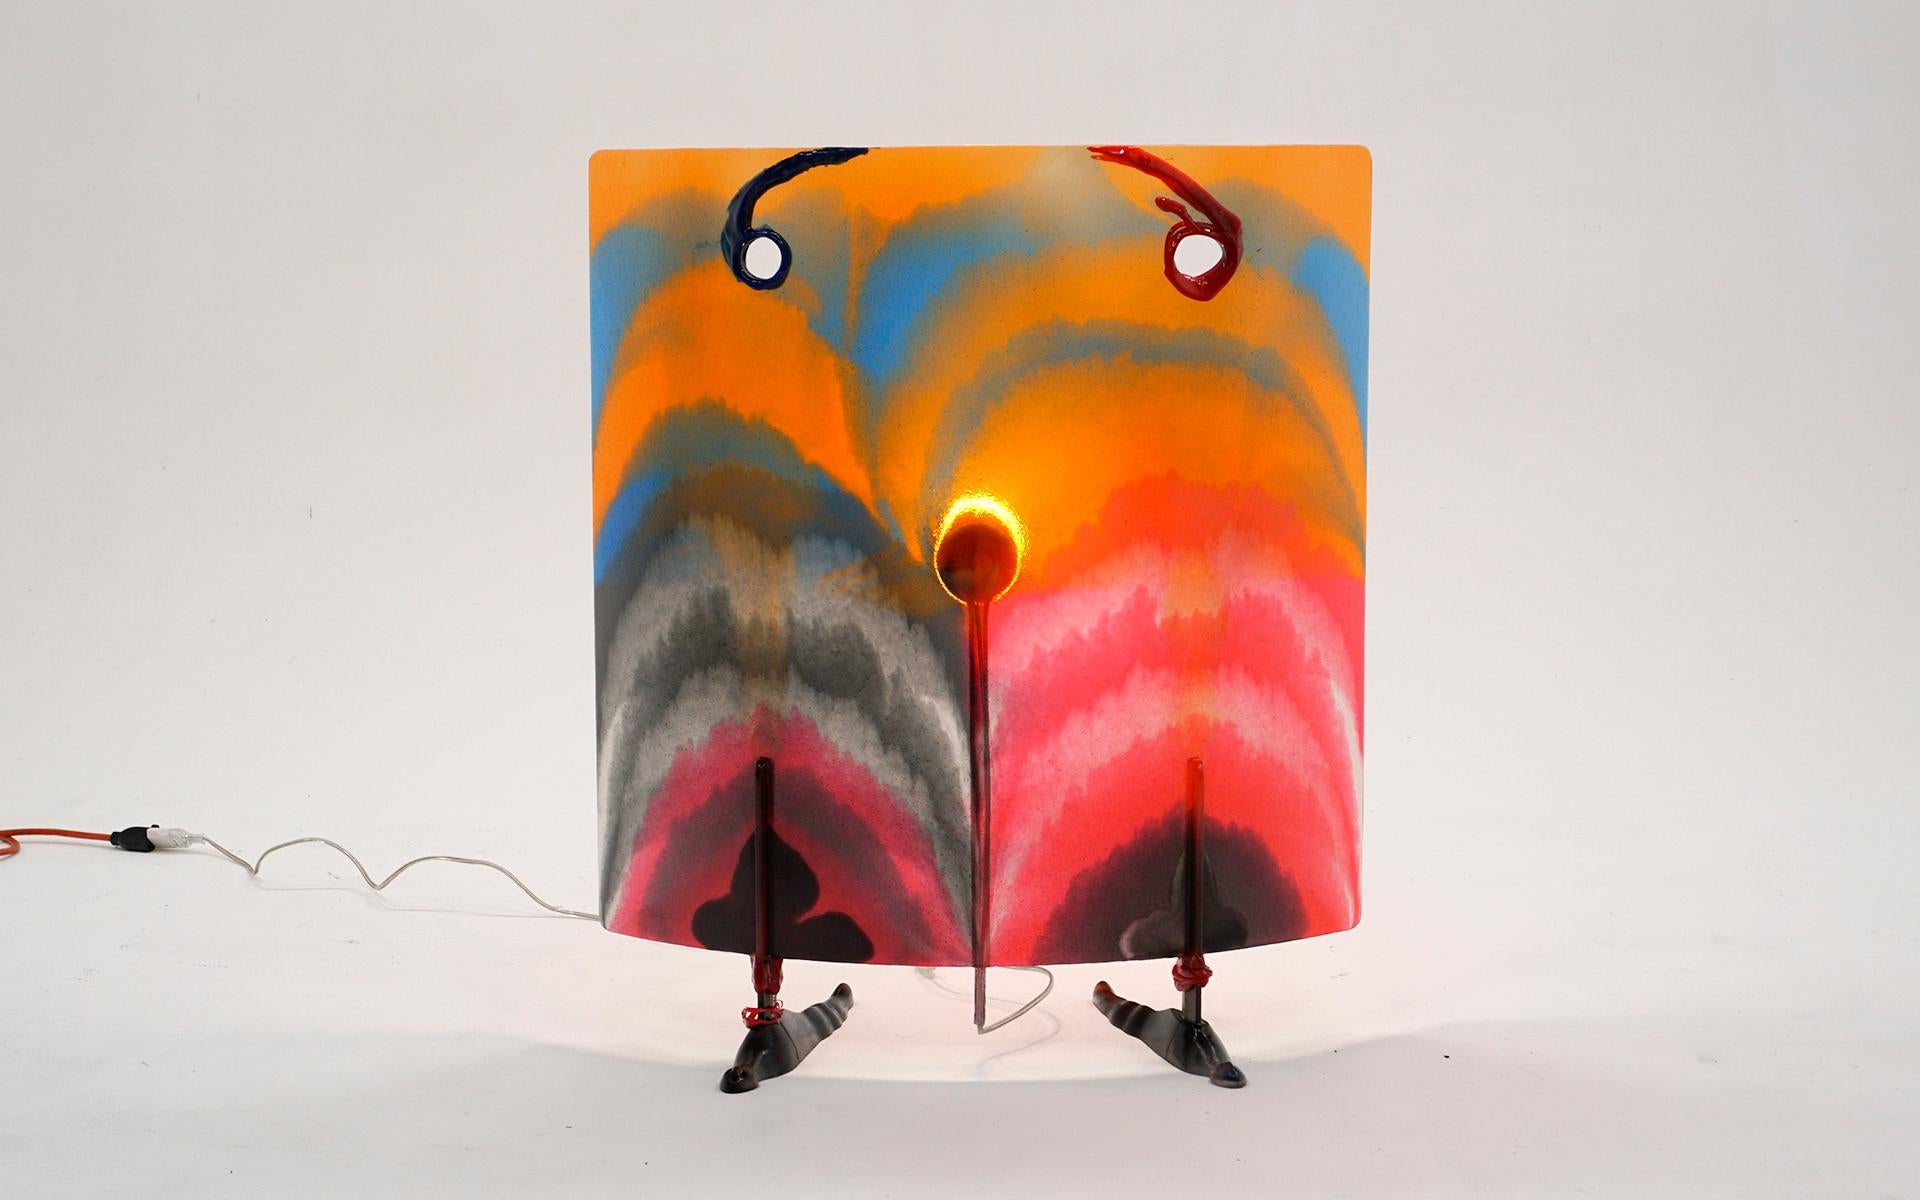 Multicolored Chador Table Lamp From The Open Sky Series designed by Gaetano Pesce.  Made of Resin, very sturdy. The Open Sky series was produced in a very limited edition for Fish Design in New York.  Works perfectly and the condition is virtually